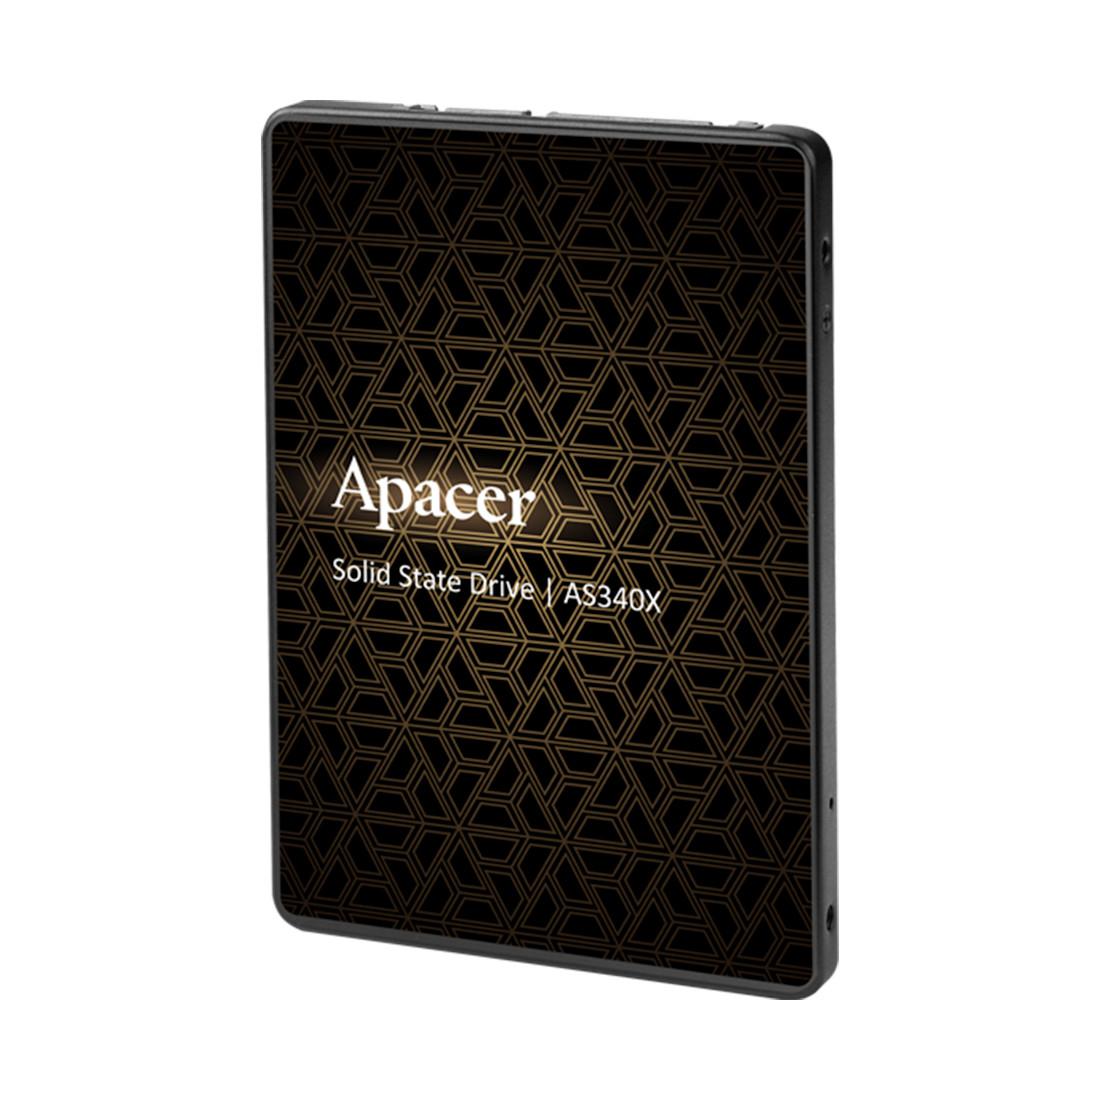 APACER SSD 240GB 2.5in AS340 6GB/s